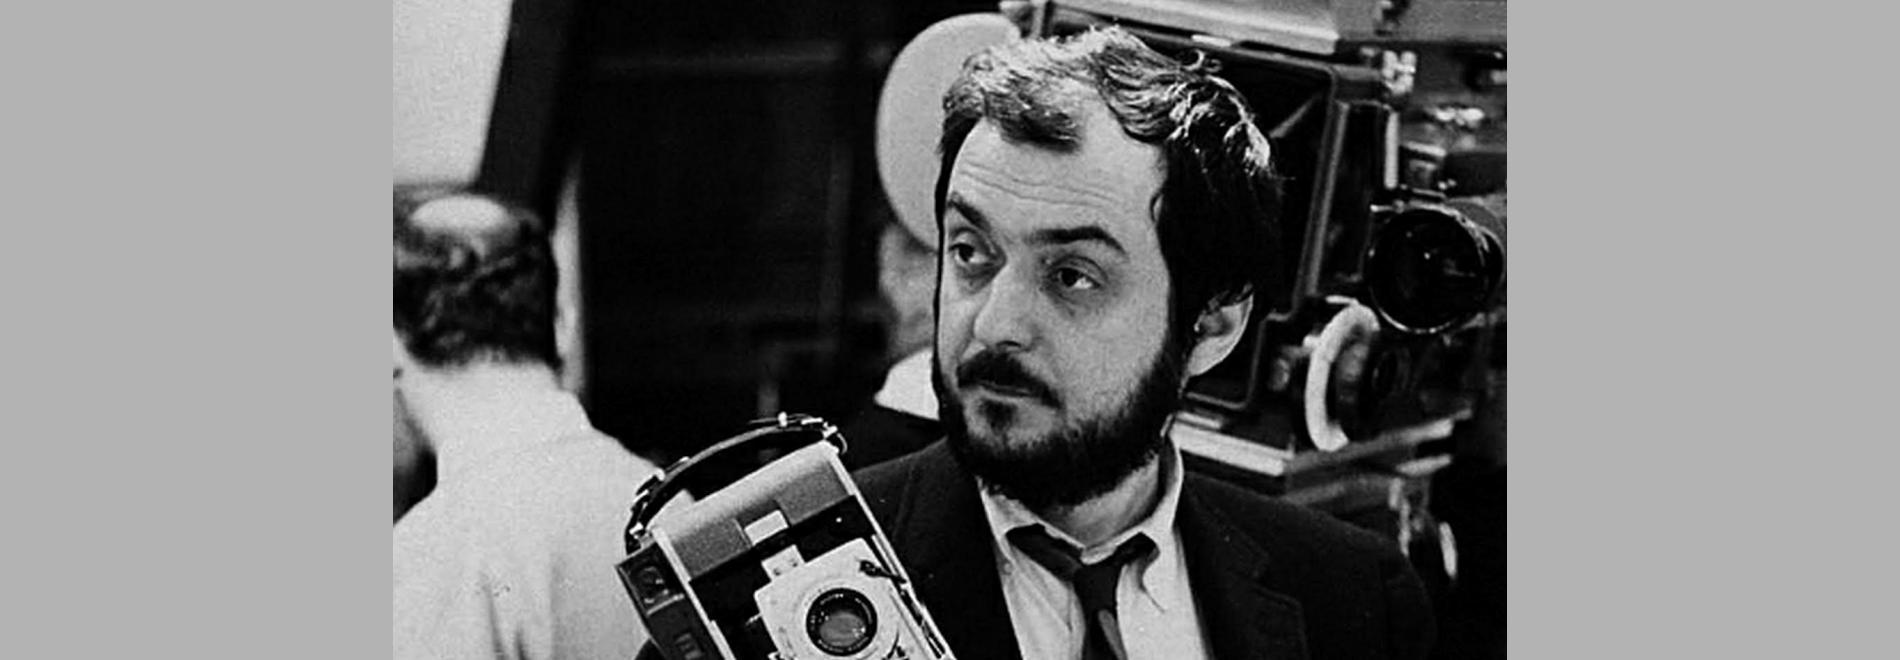 Stanley Kubrick: A Life in Pictures (Jan Harlan, 2001)